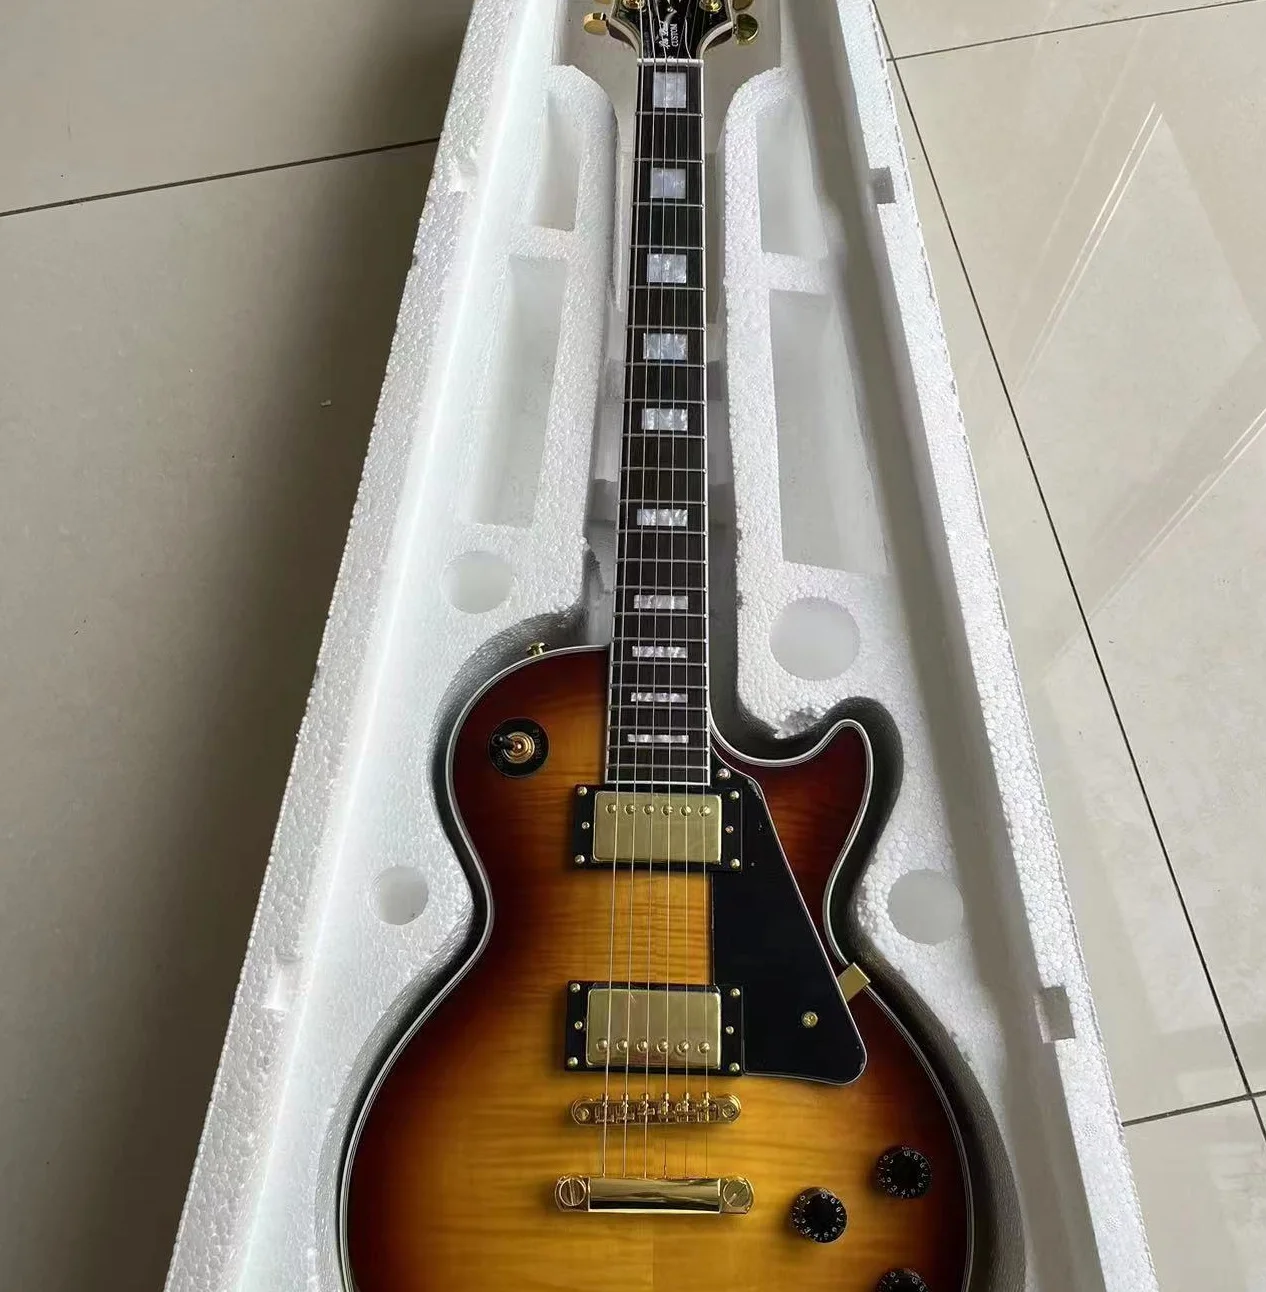 

Relic Electric Guitar Flamed Maple Top 1959 Tribute to Gary Moore Peter Green Smoked Sunburst One Piece Body and Neck VDSBGSH